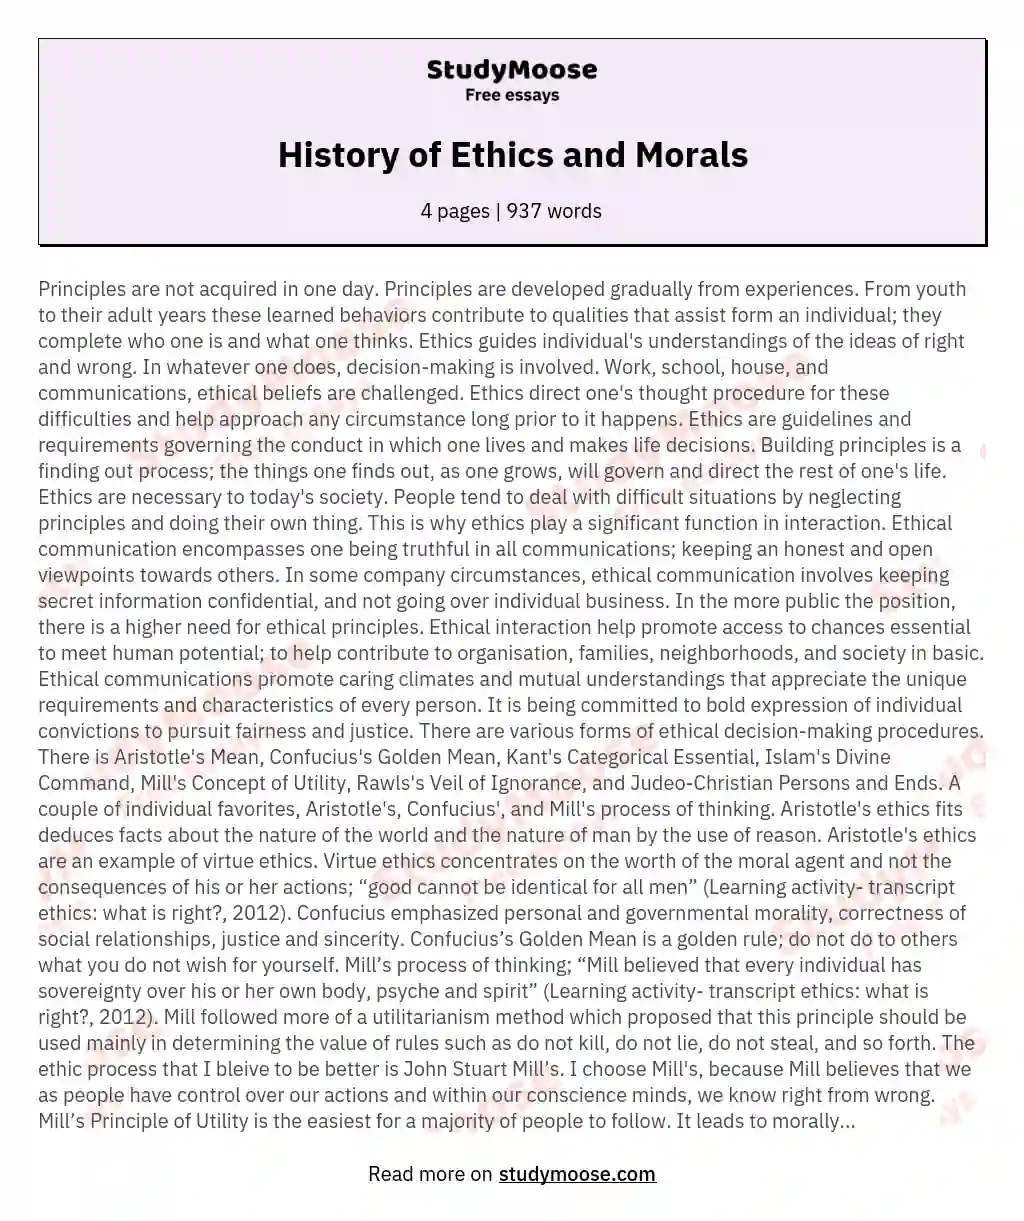 History of Ethics and Morals essay